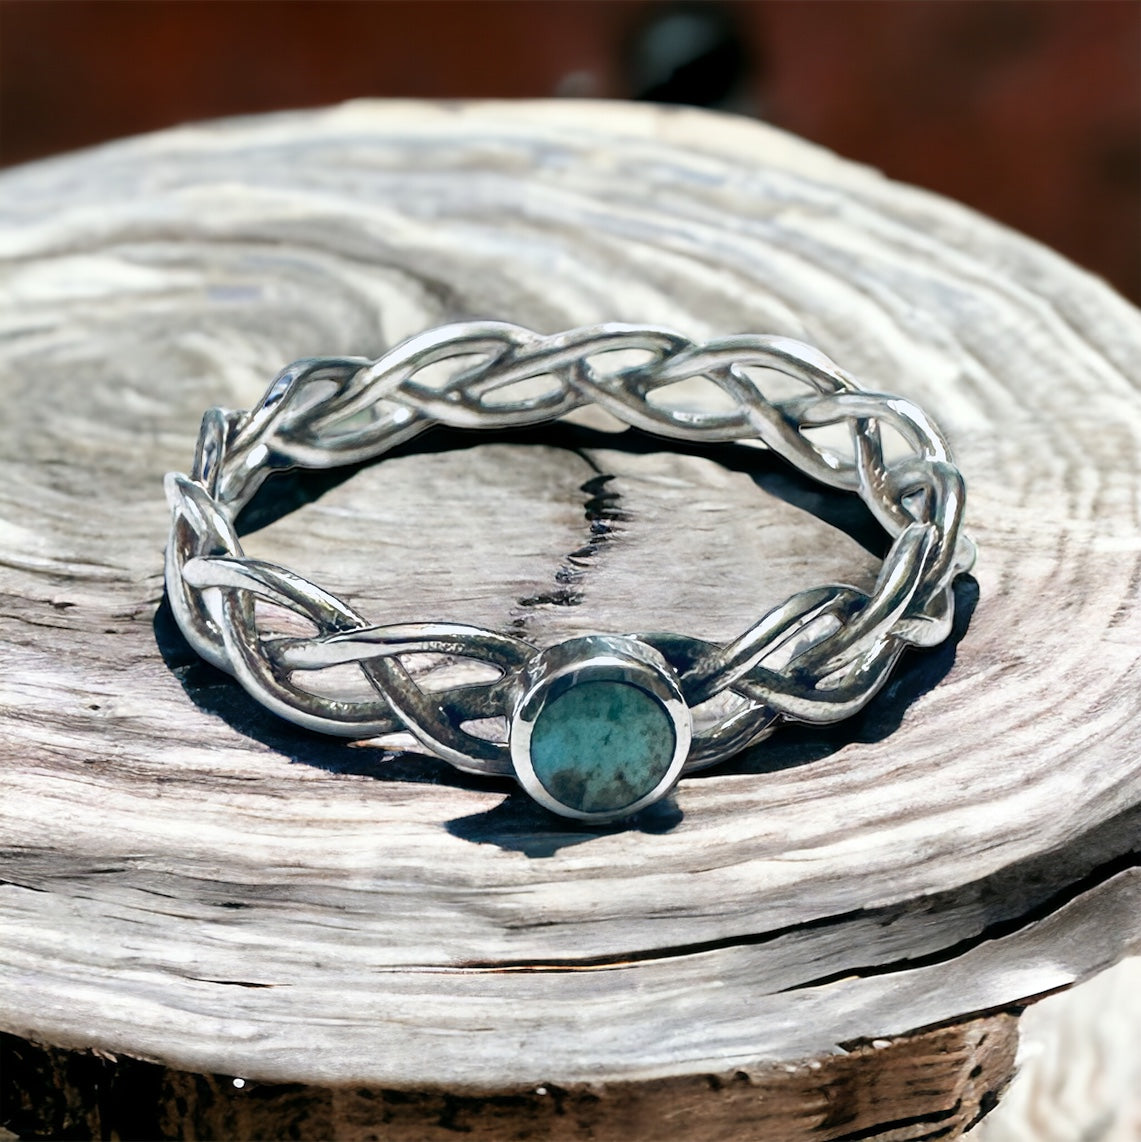 Sterling Silver Turquoise Stone Braided Ring